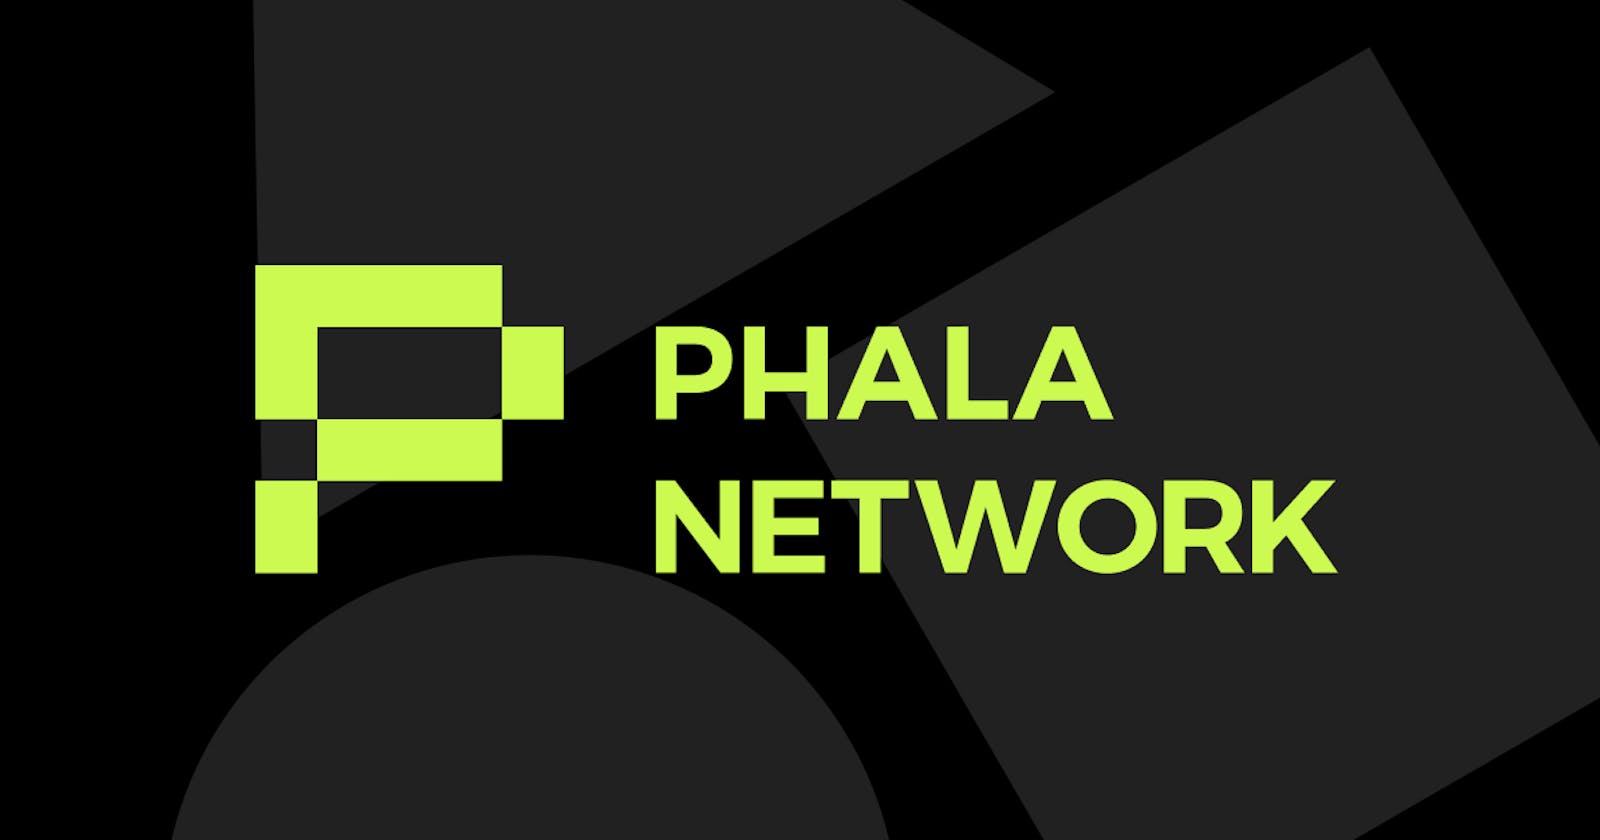 Phala Network: The ability to bring Web2 Data onchain